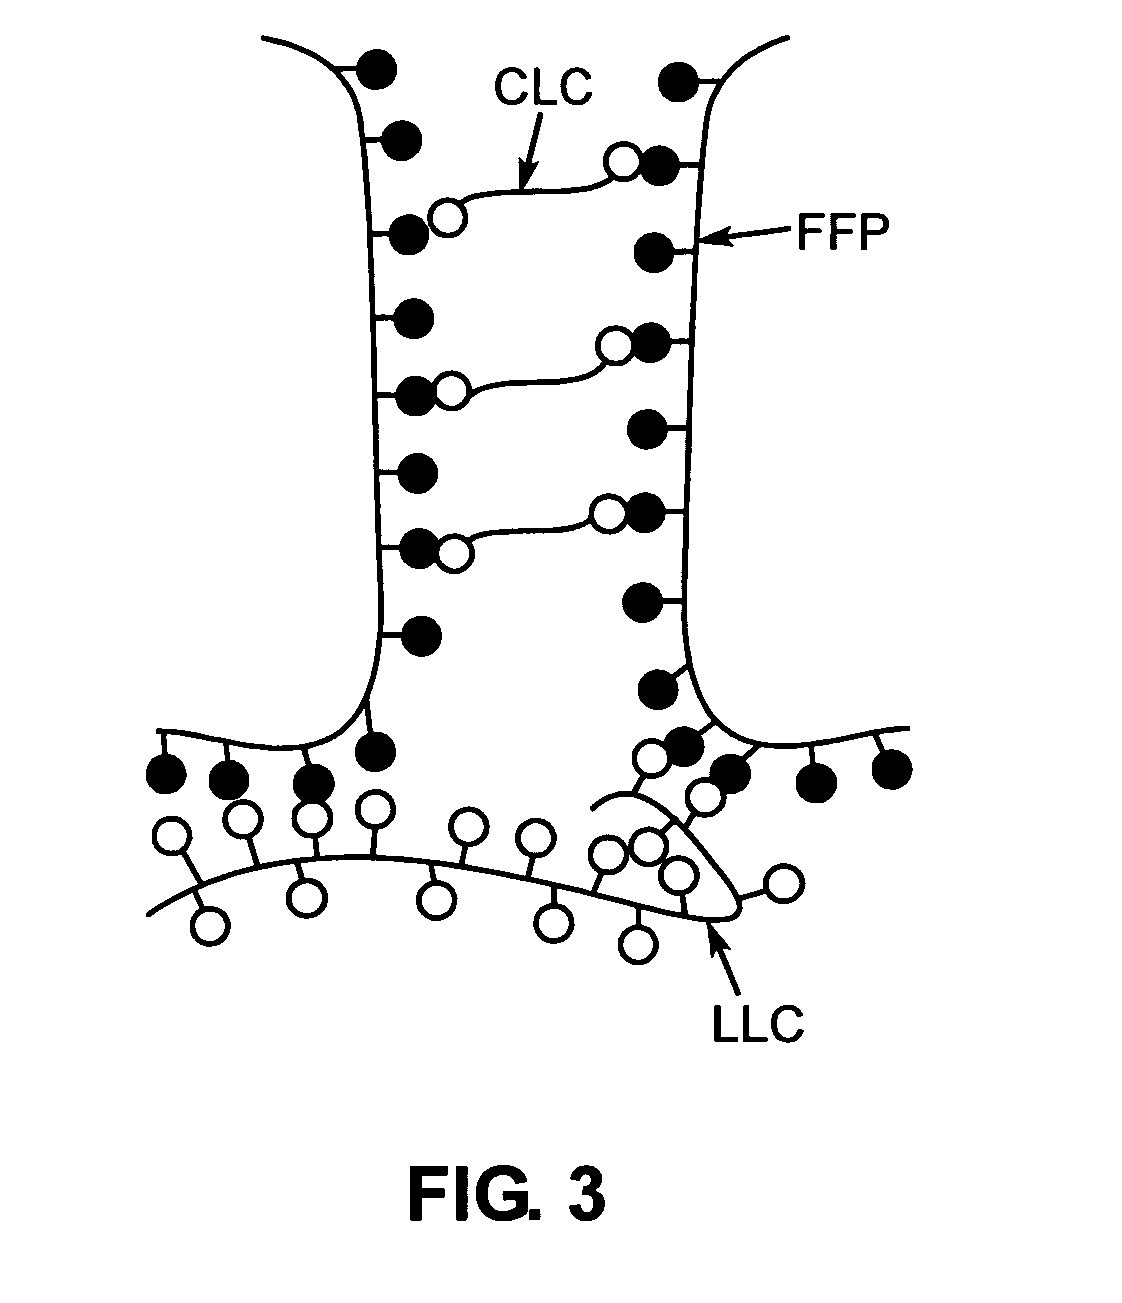 Method of preparing polymeric adhesive compositions utilizing the mechanism of interaction between the polymer components